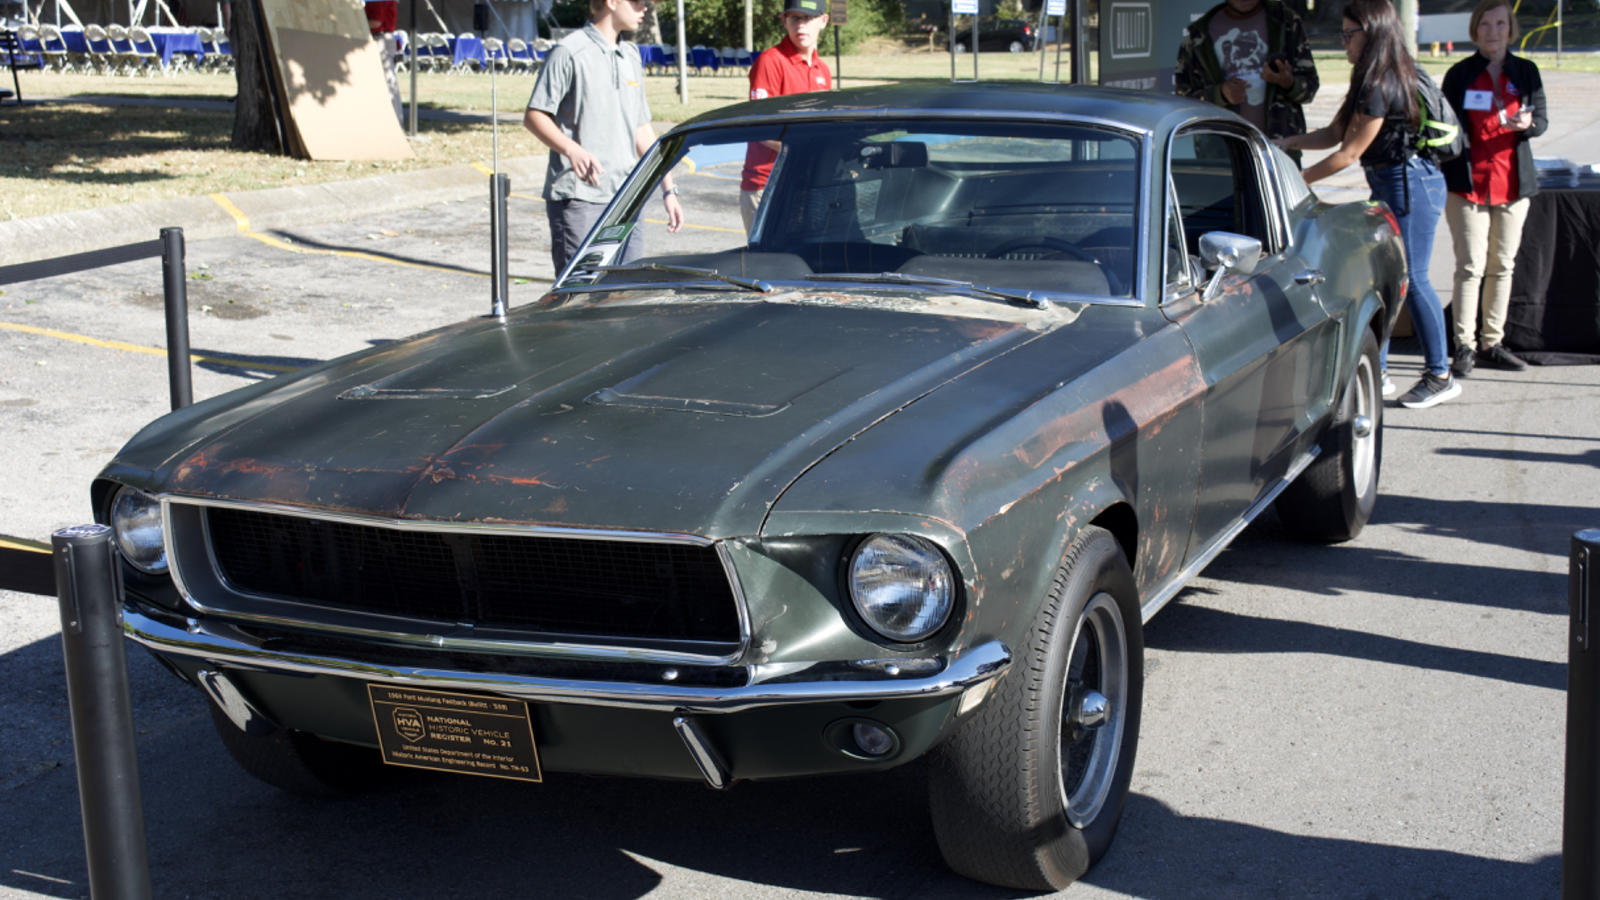 The Original 1968 Ford Mustang 390 Driven by Steve McQueen in the Movie Bullitt Displayed at Lincoln Tech's Nashville Campus